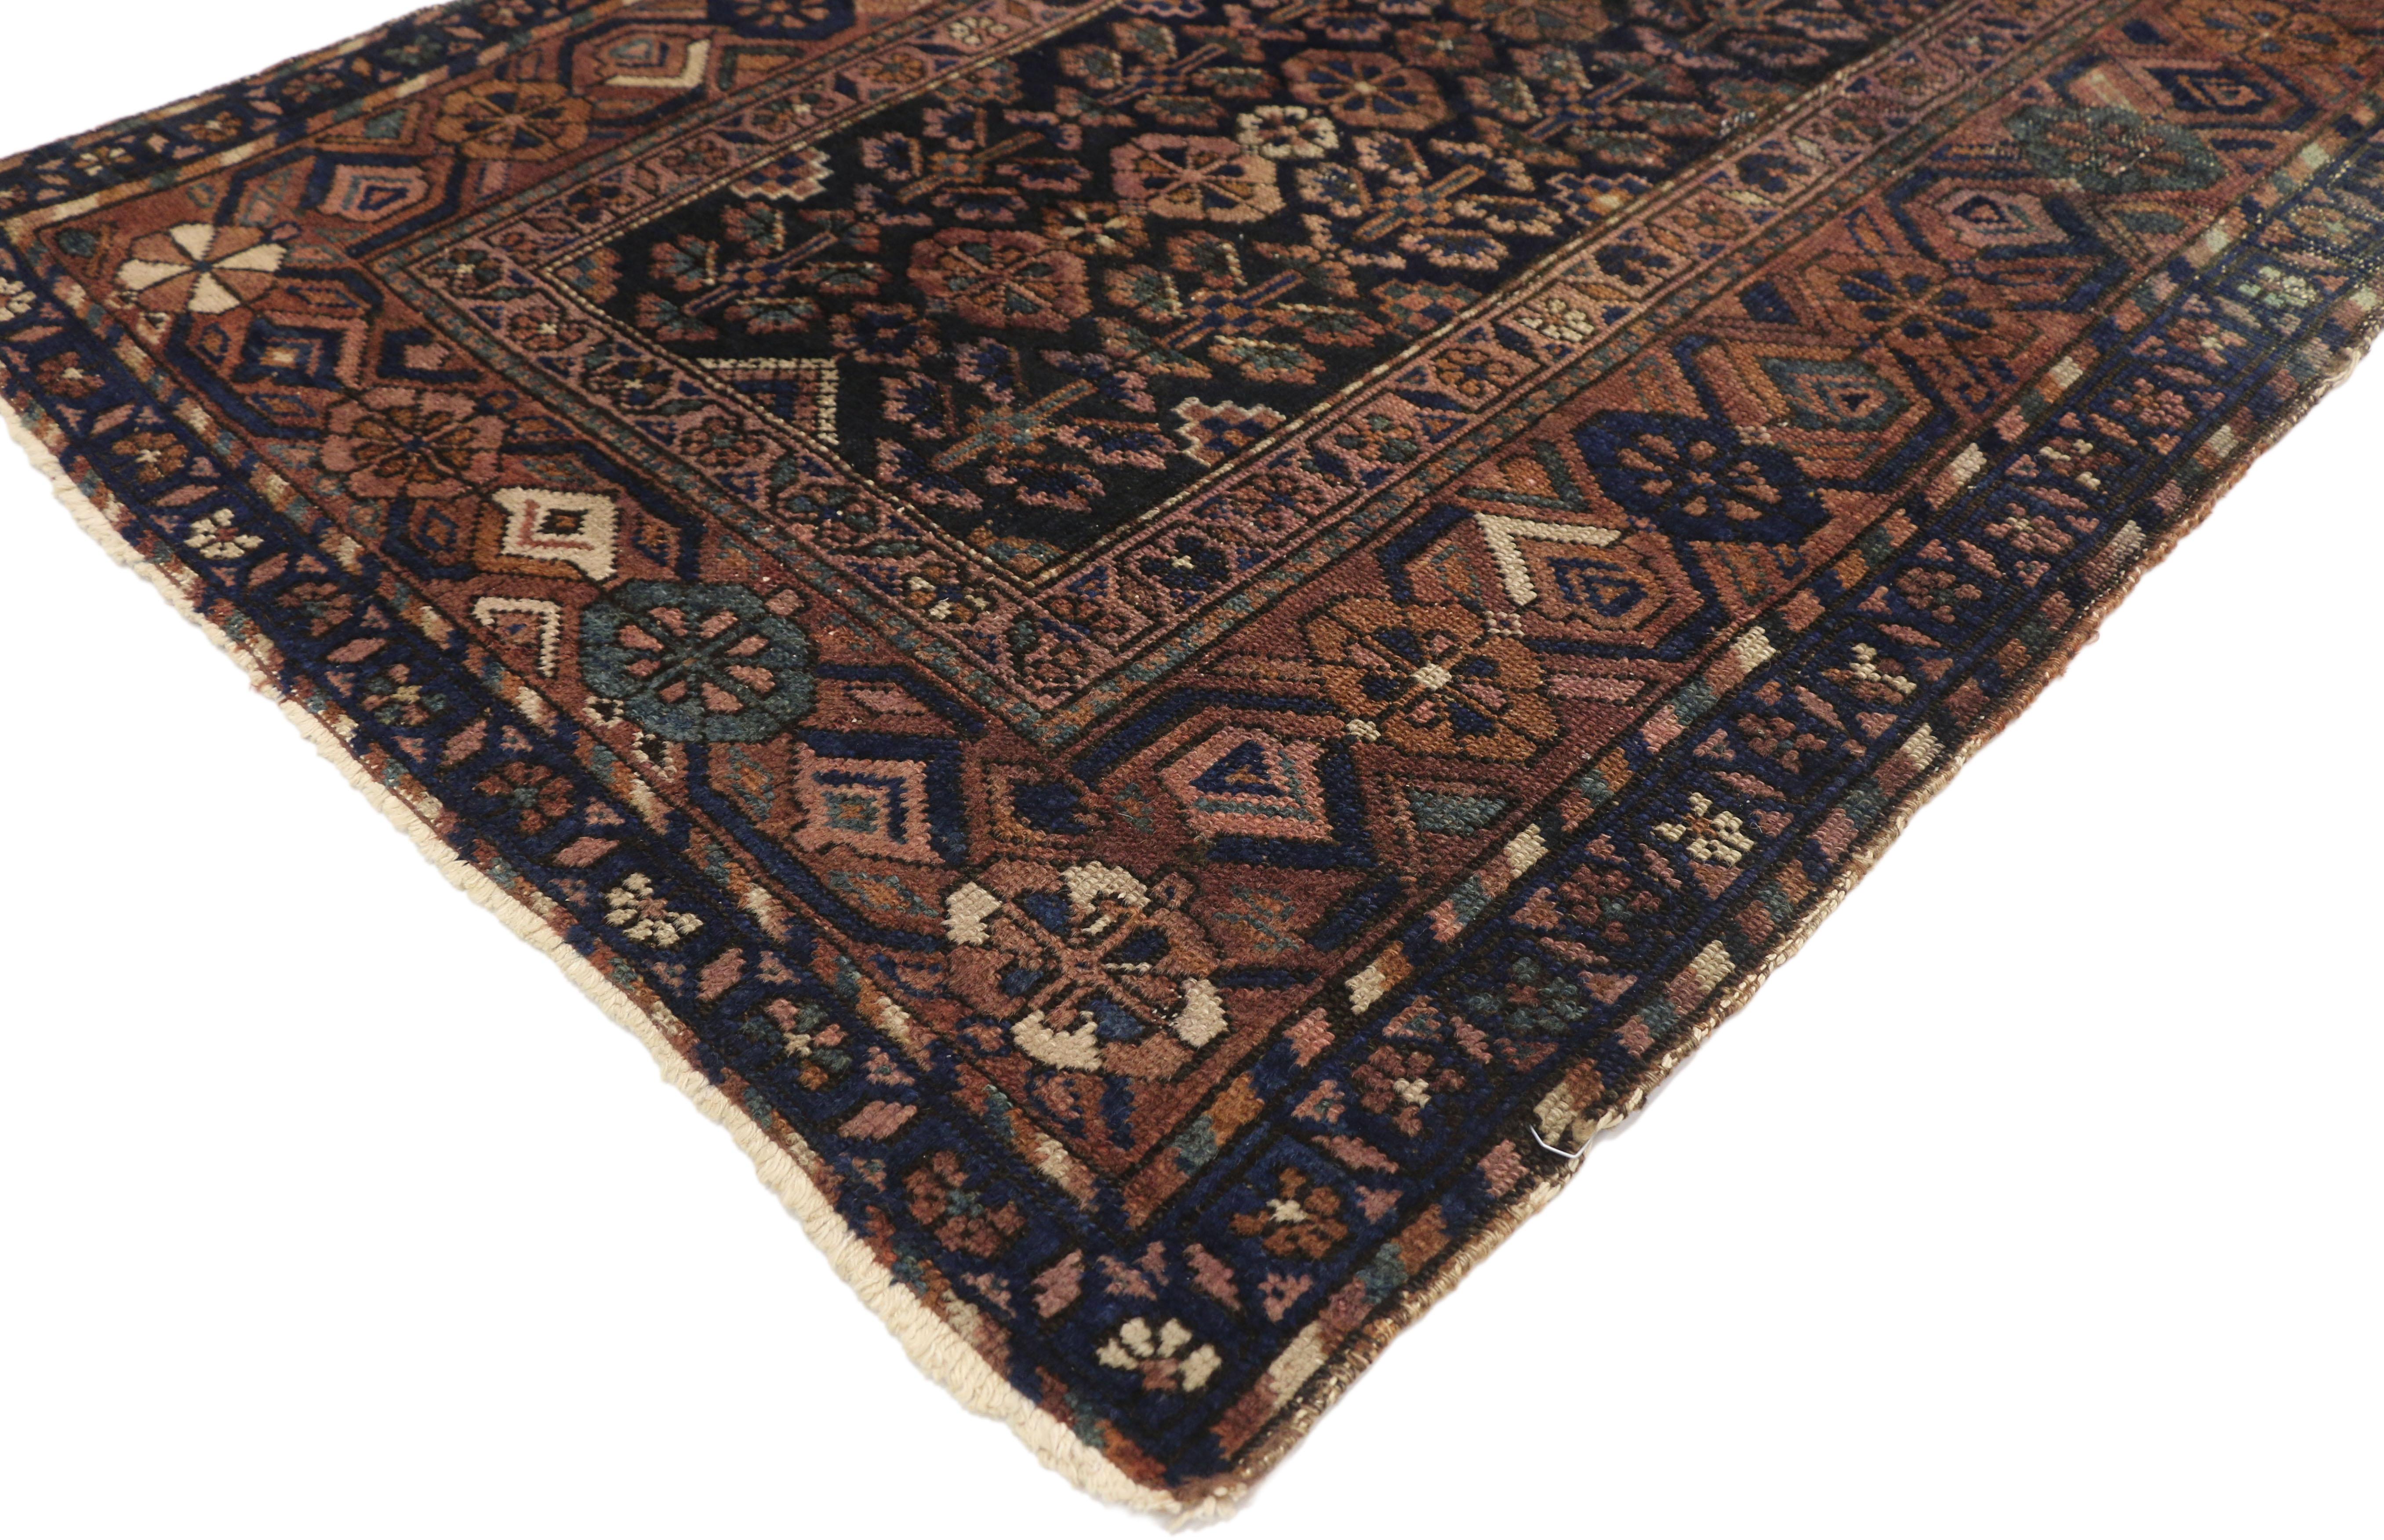 73071 Worn-In Distressed Antique Persian Hamadan Accent Rug with Modern Rustic Style 03'05 x 06'00. With its perfectly worn-in charm and edgy elements, this distressed antique Persian Hamadan rug will create a warm, lived-in look and take on a